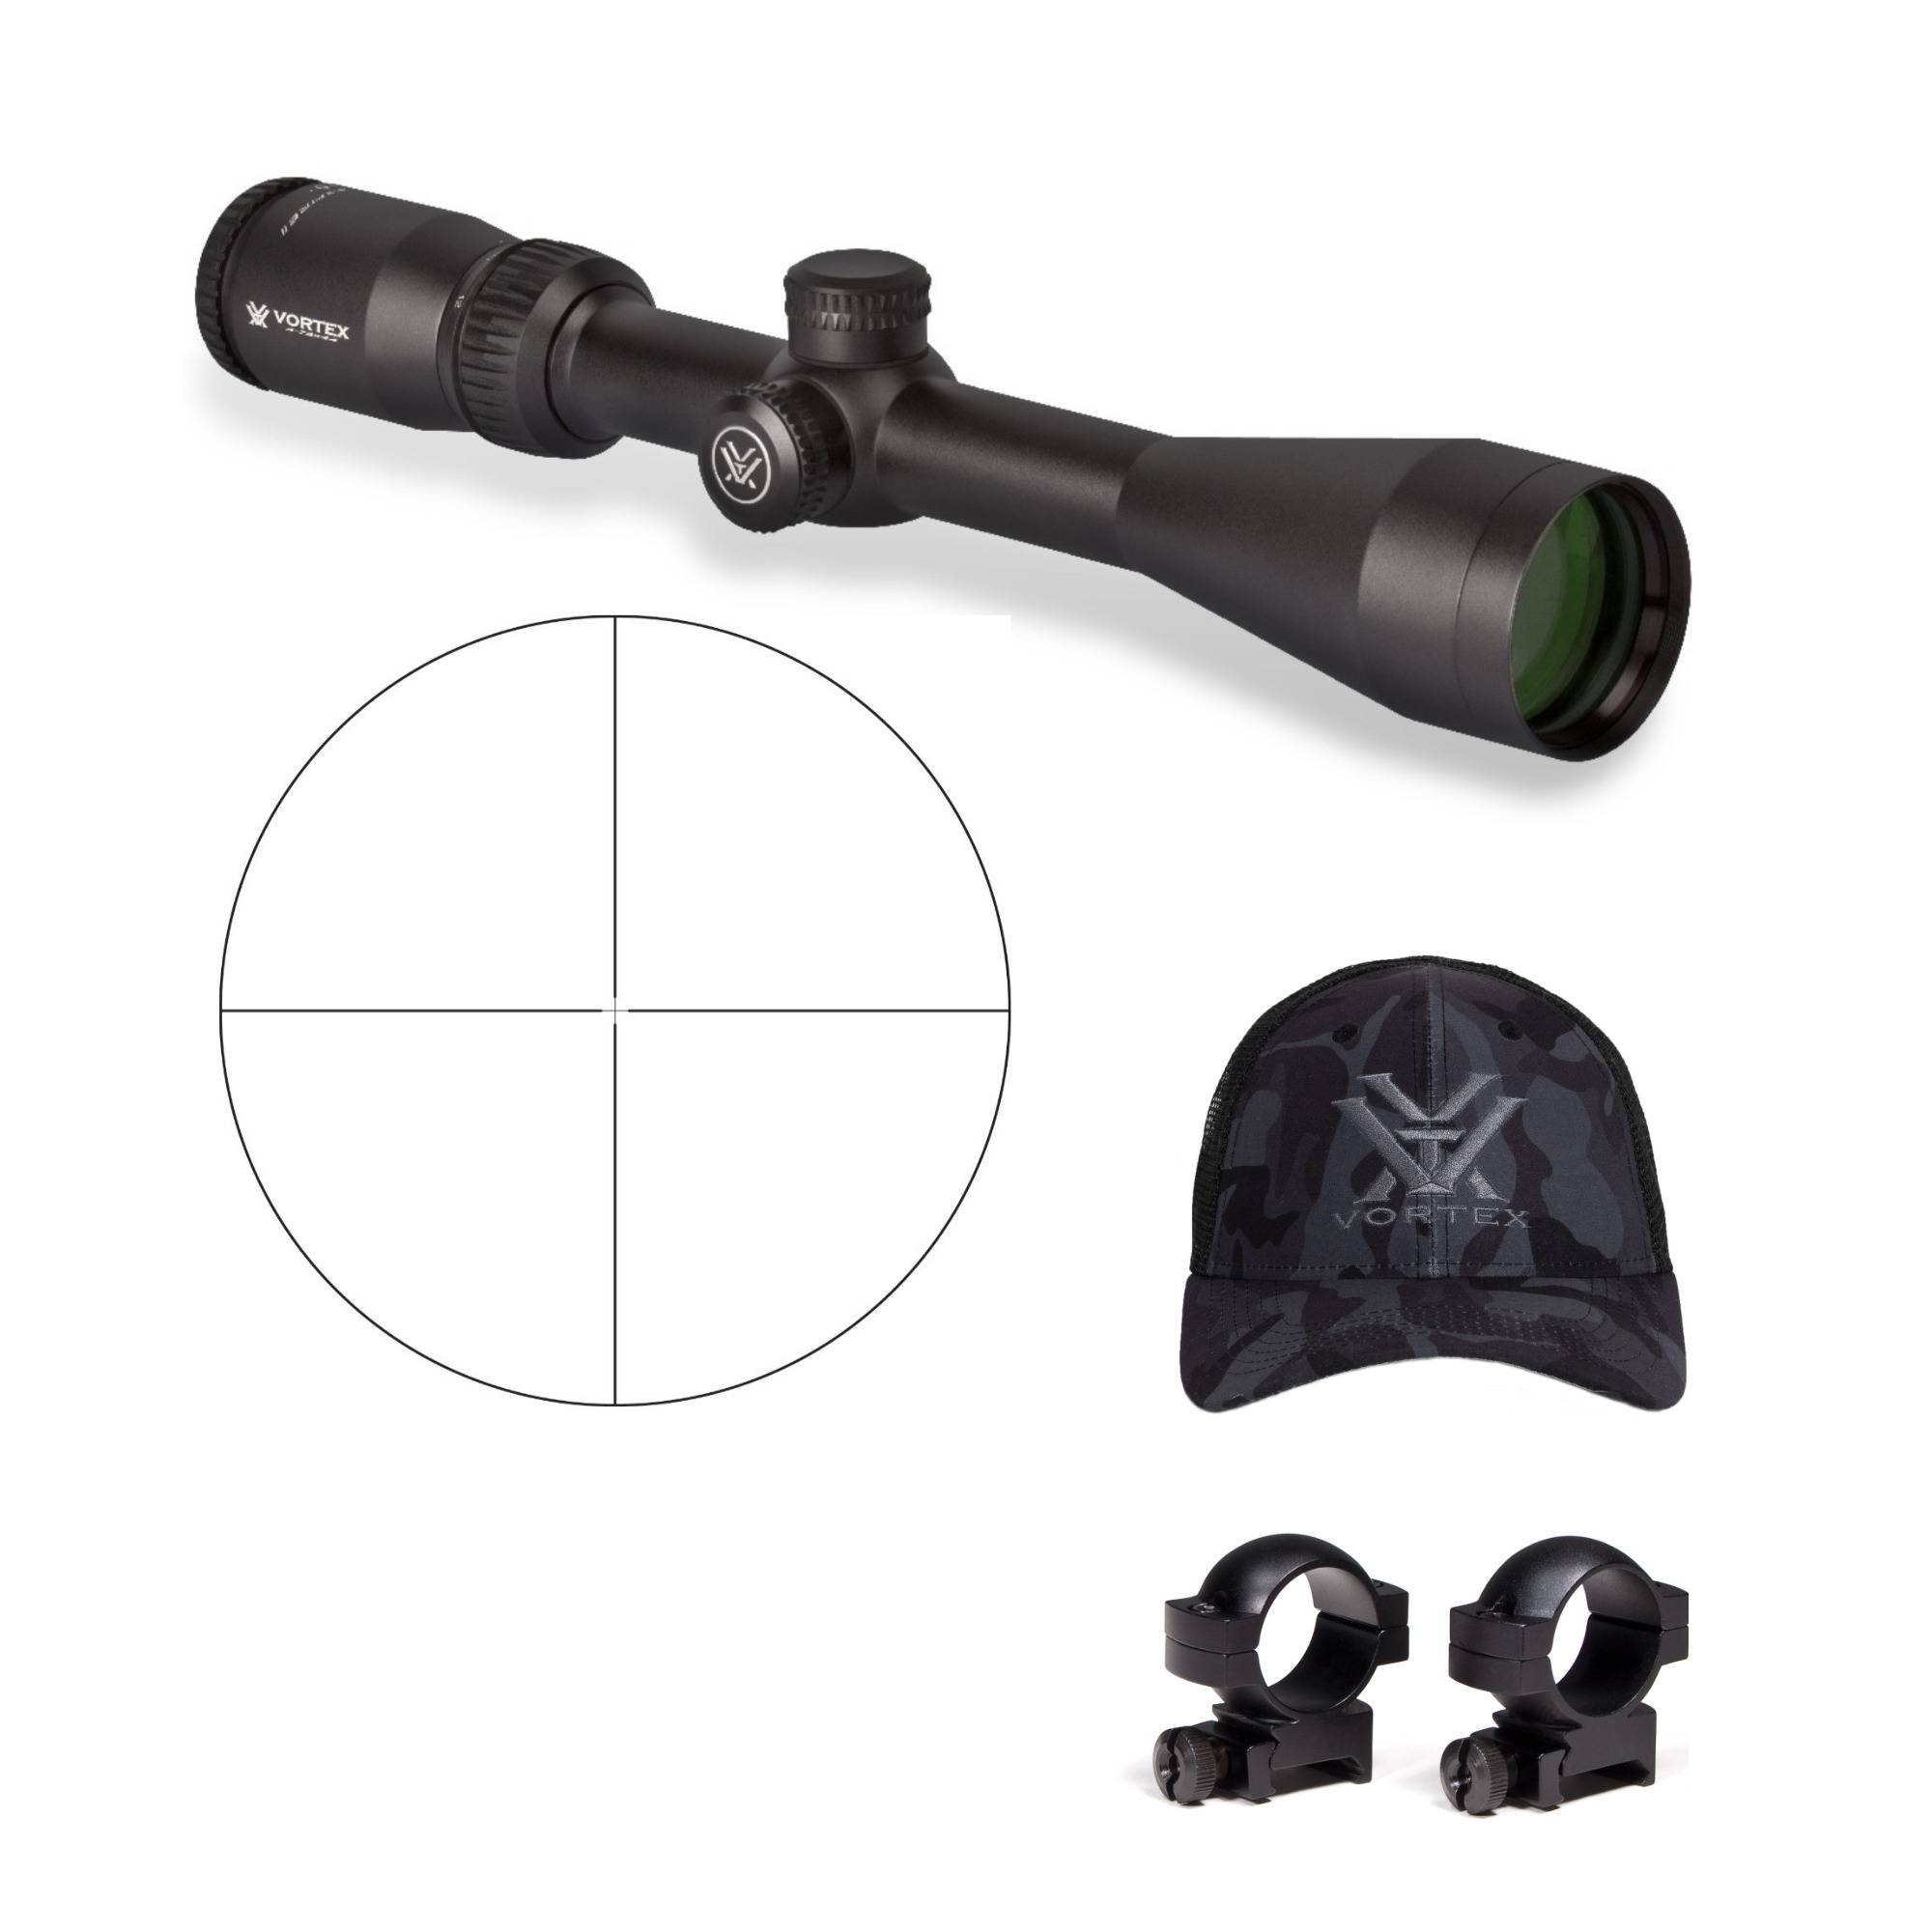 Vortex Crossfire II 4-12x44 Riflescope (V-Plex MOA Reticle) with 1-inch Scope Rings and Hat